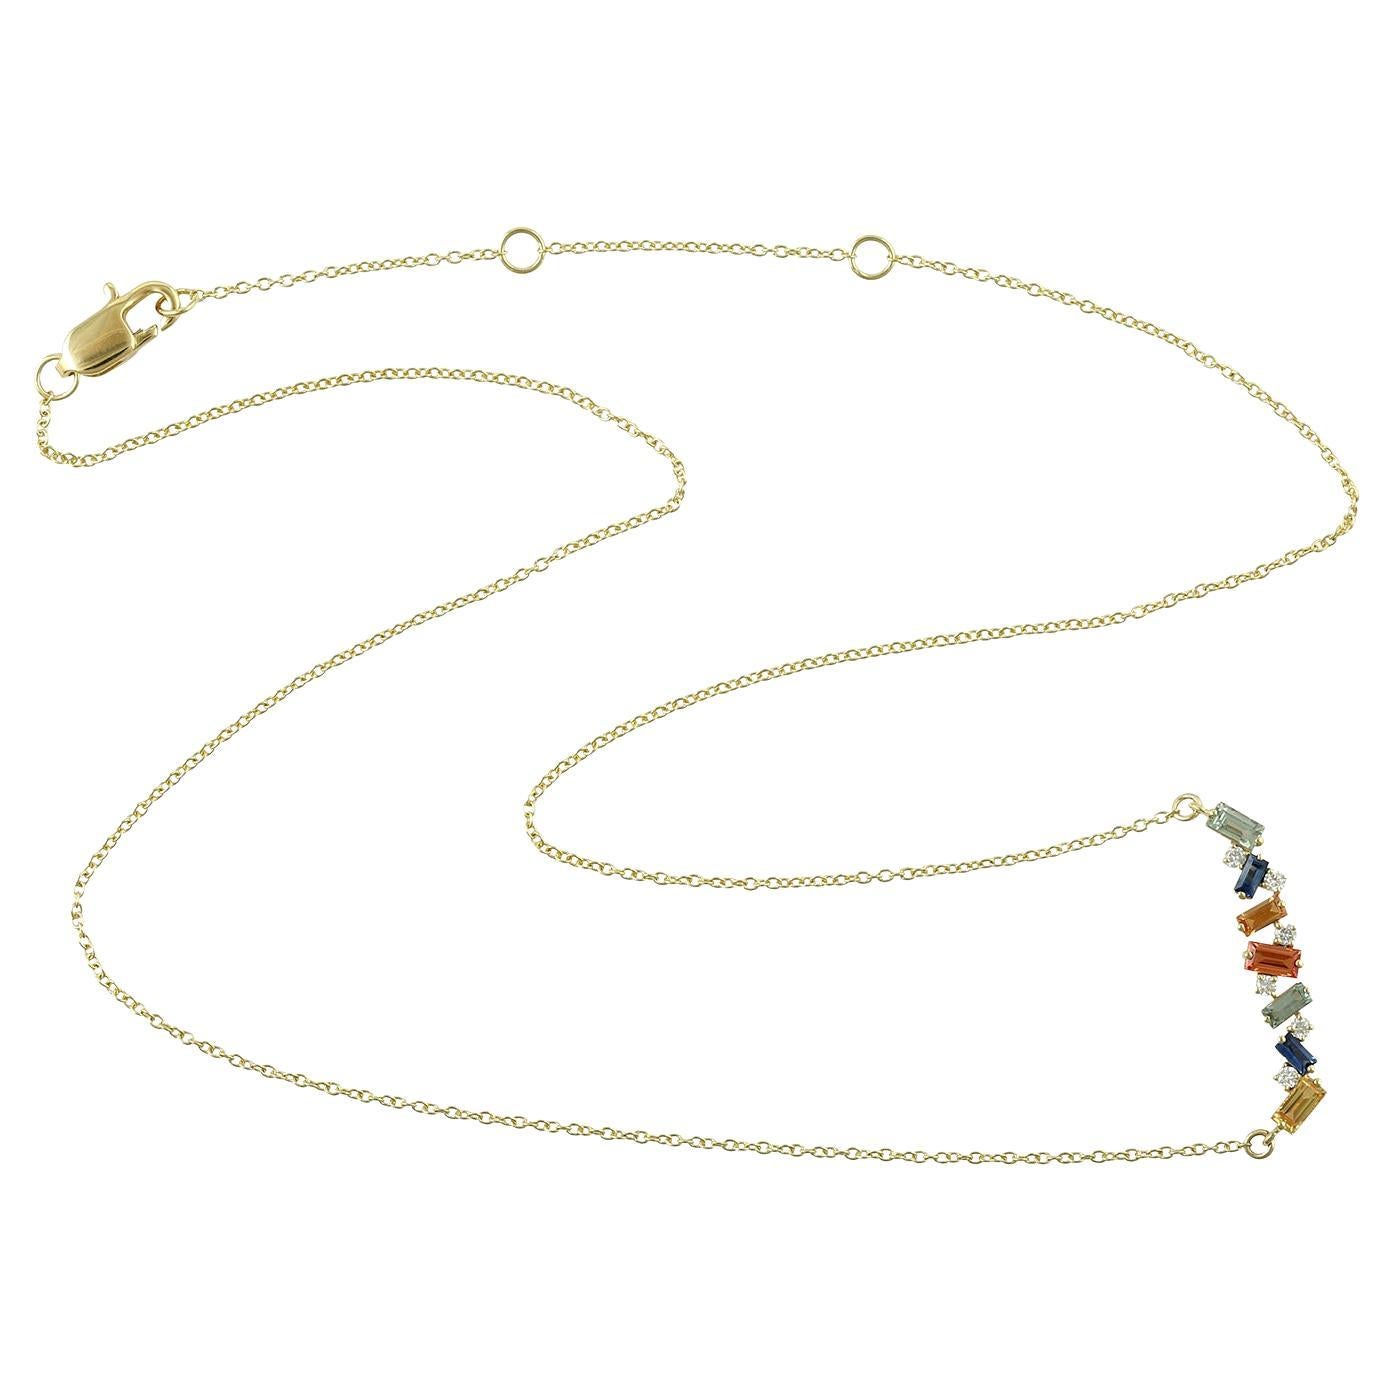 Rainbow Sapphire & Diamonds Pendant Chain Necklace Made In 18k Yellow Gold For Sale